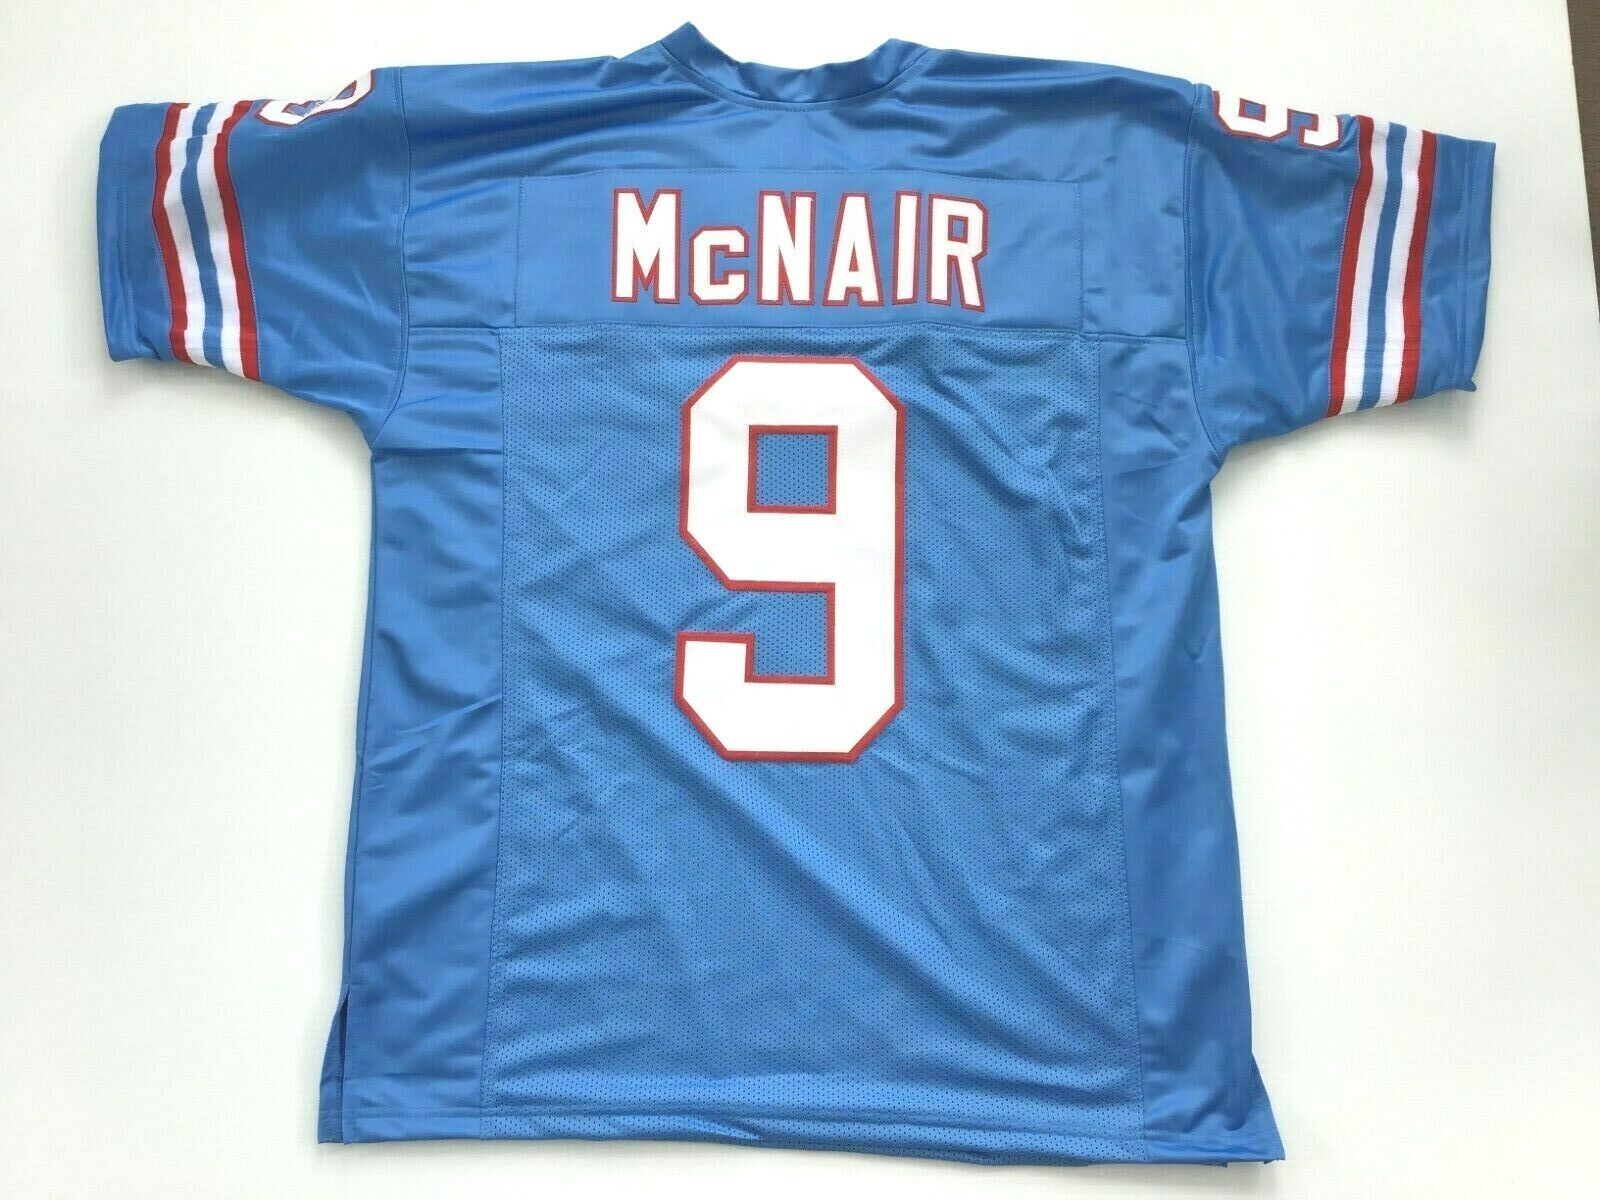 UNSIGNED CUSTOM Sewn Stitched Steve McNair Old Style Blue Jersey - M, L, XL, 2XL